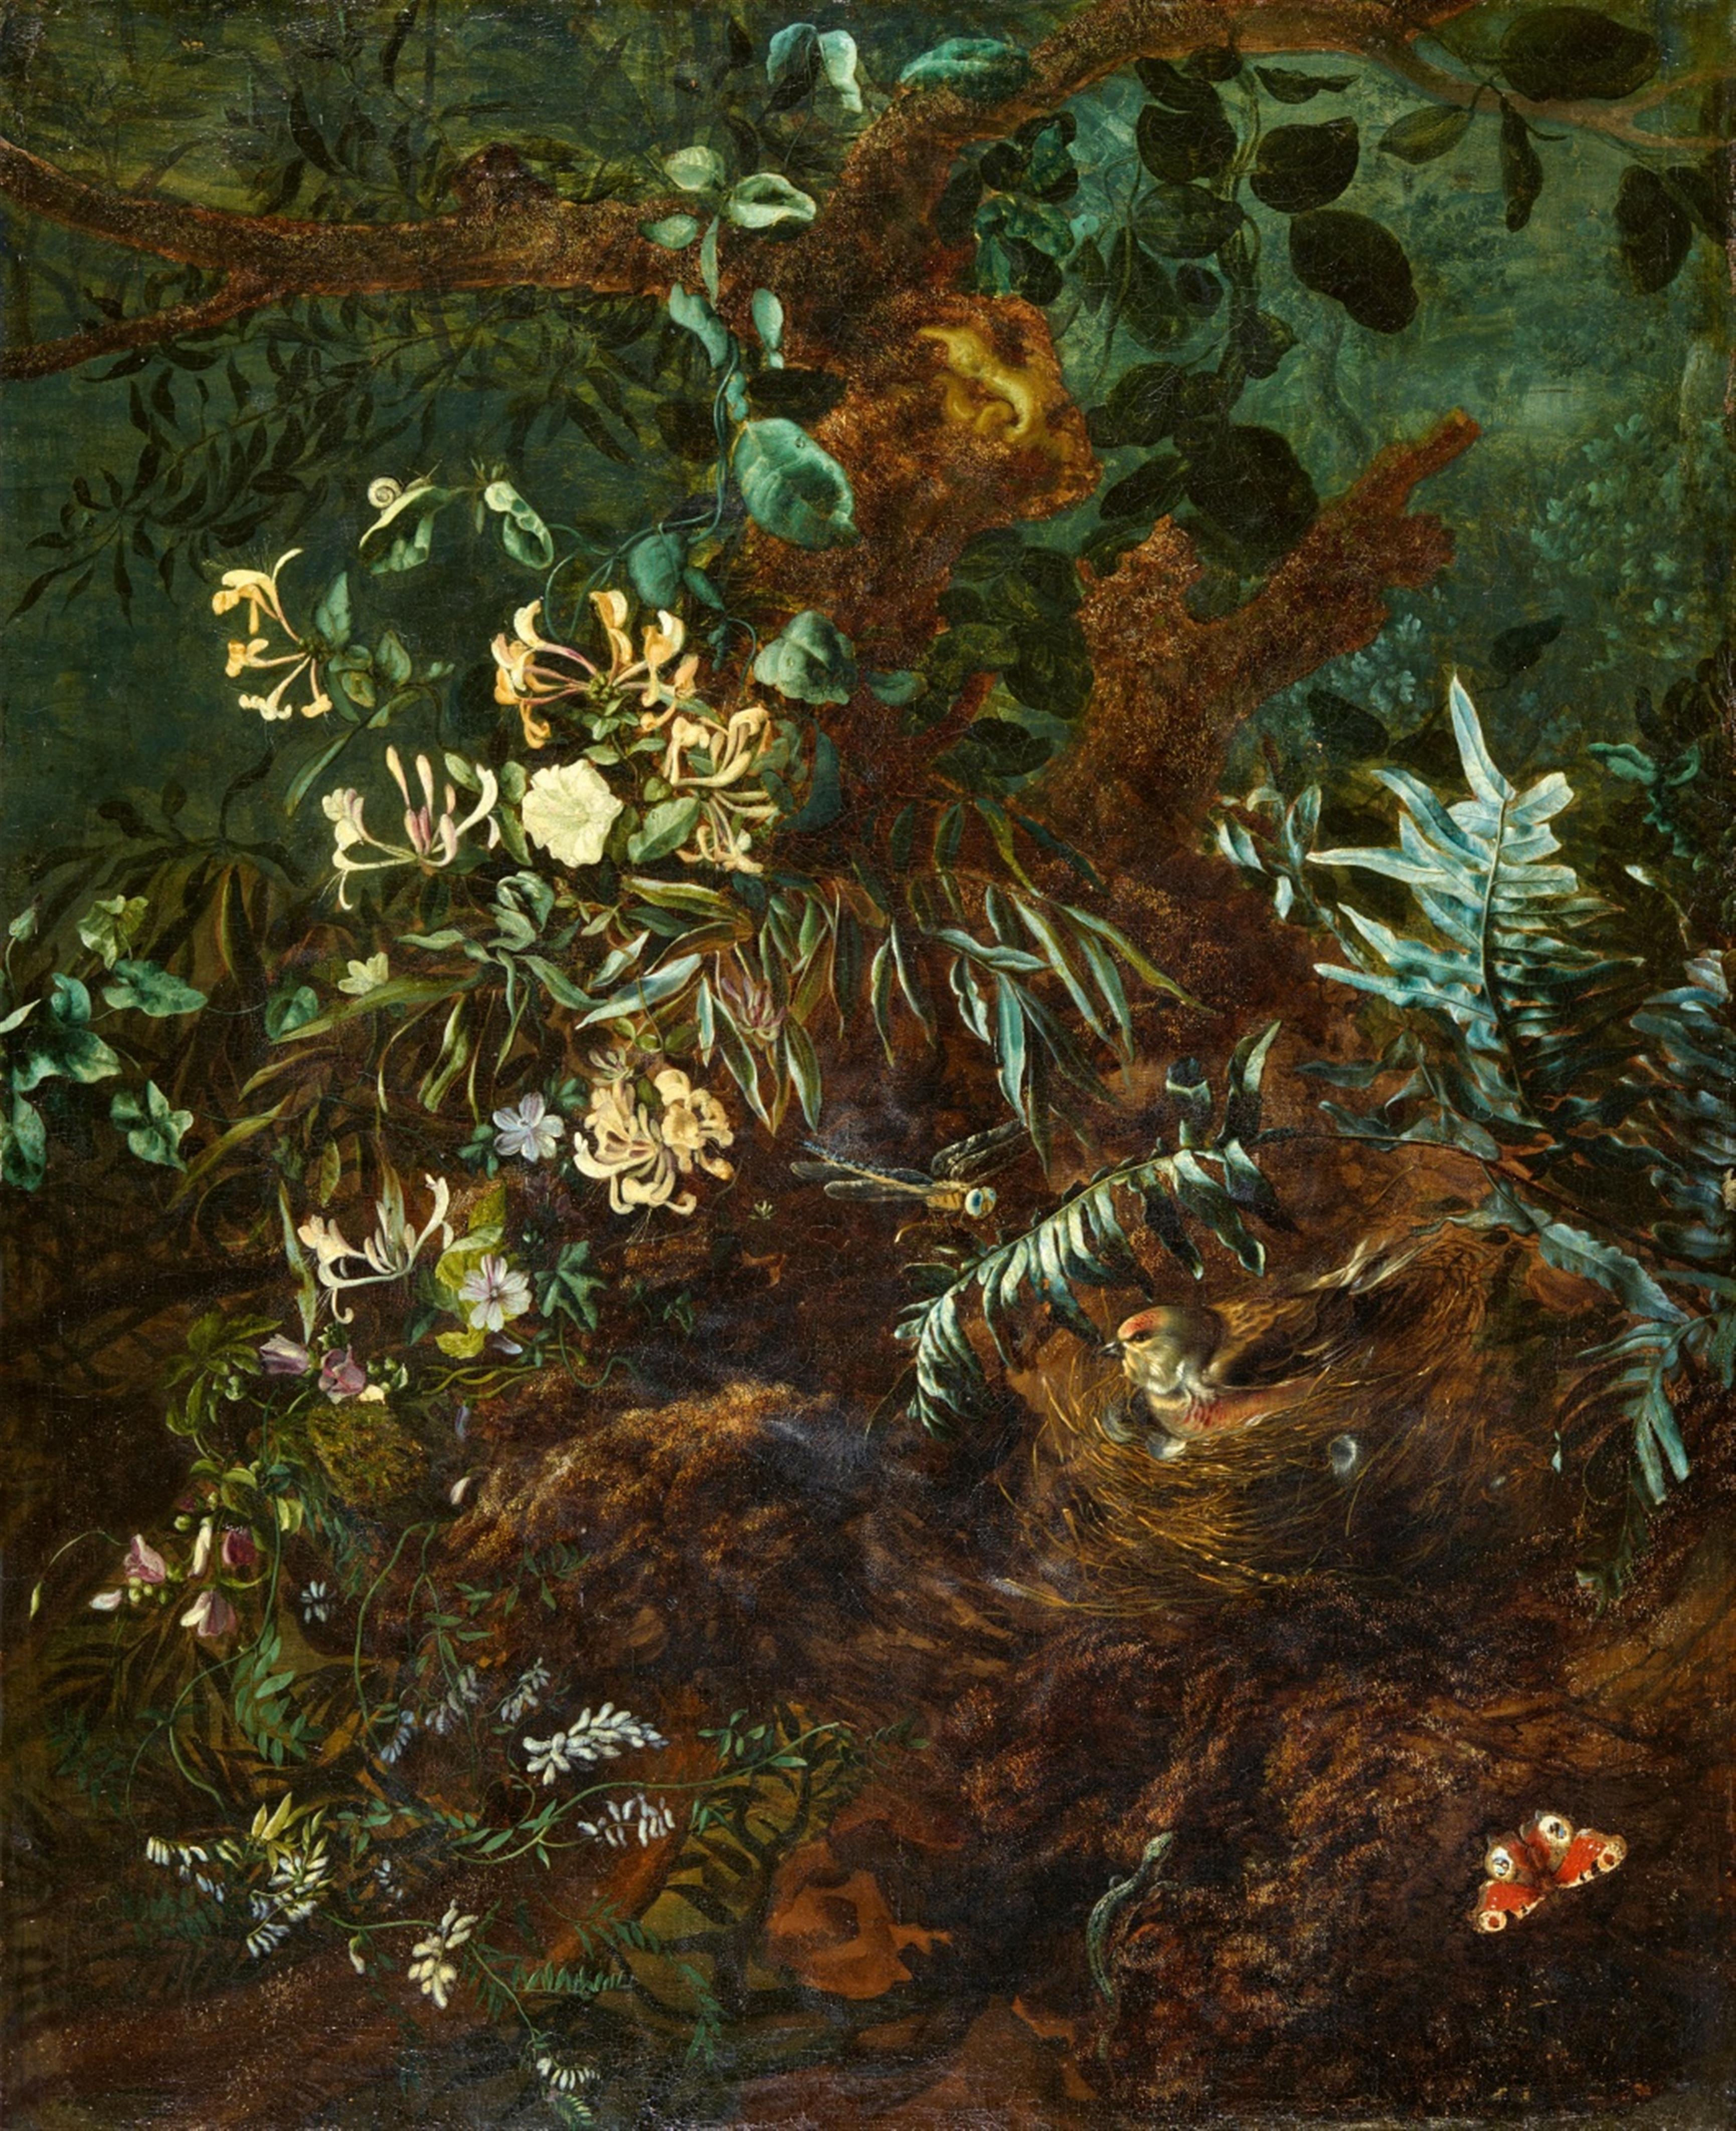 Isac Vromans - Sous-bois Still Life with a Nest, Dragonfly, Butterfly, Lizard, and white Azaleas - image-1